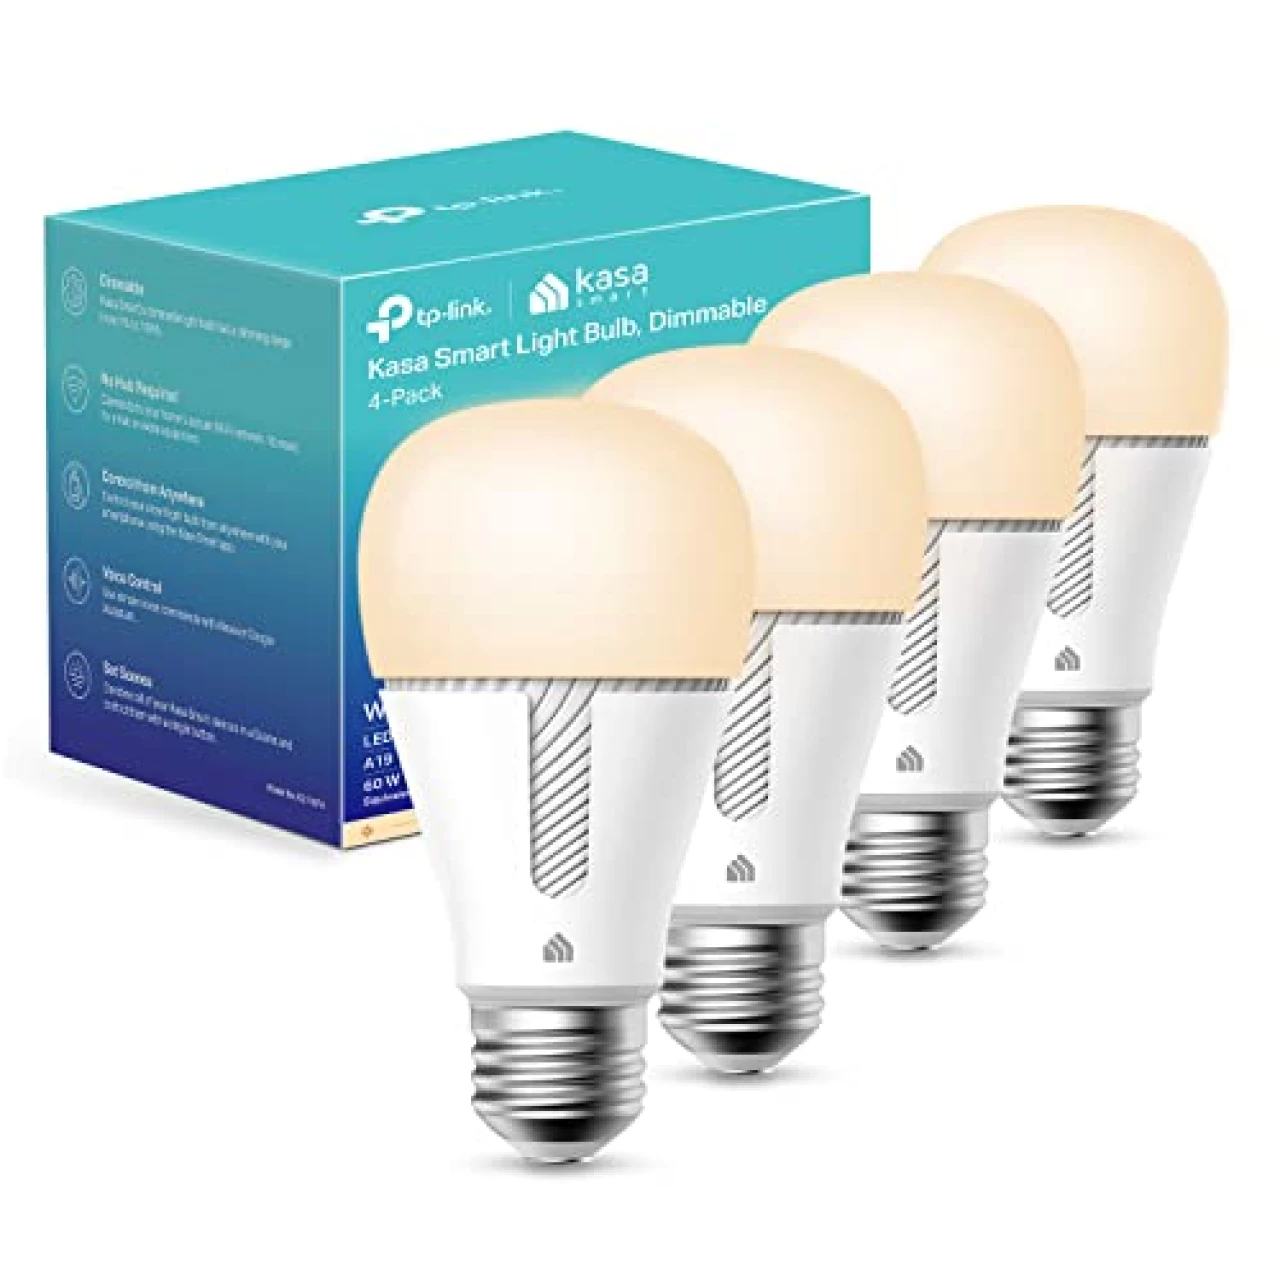 Kasa Smart Light Bulbs, Dimmable Smart LED Bulb, A19, 9W, 800Lumens, Soft White(2700K), CRI≥90, WiFi 2.4Ghz only, No Hub Required, 4-Pack